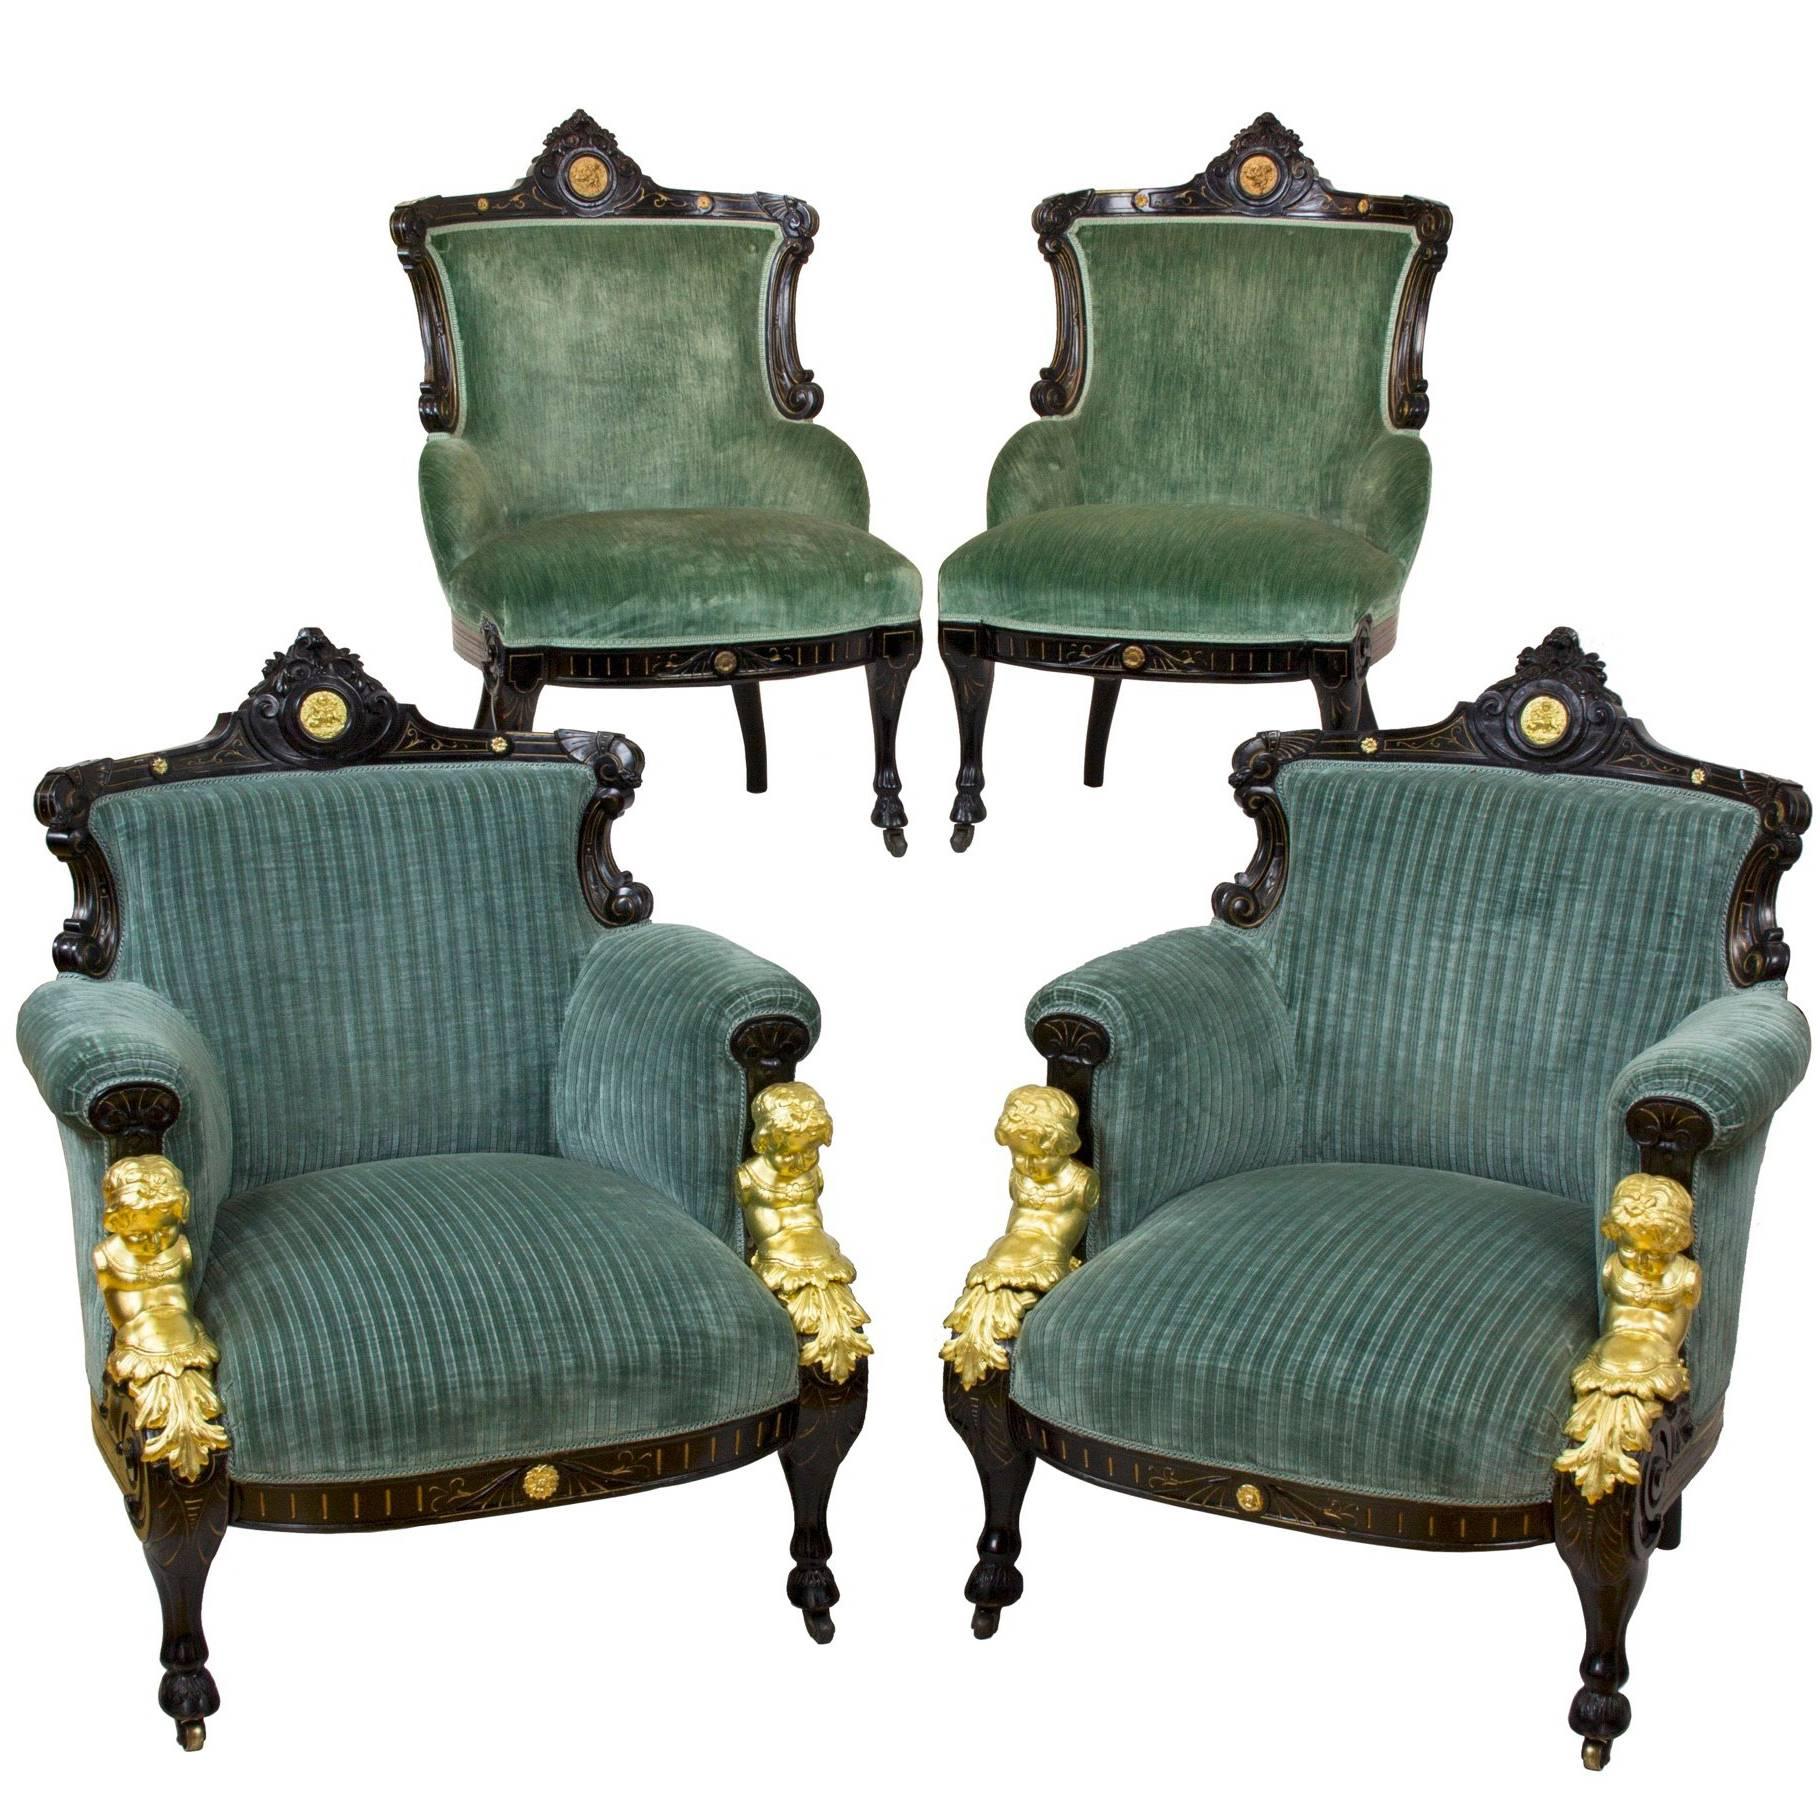 Renaissance Revival Gilt-Metal, Ebonized and Inlaid Rosewood Set of Four Chairs